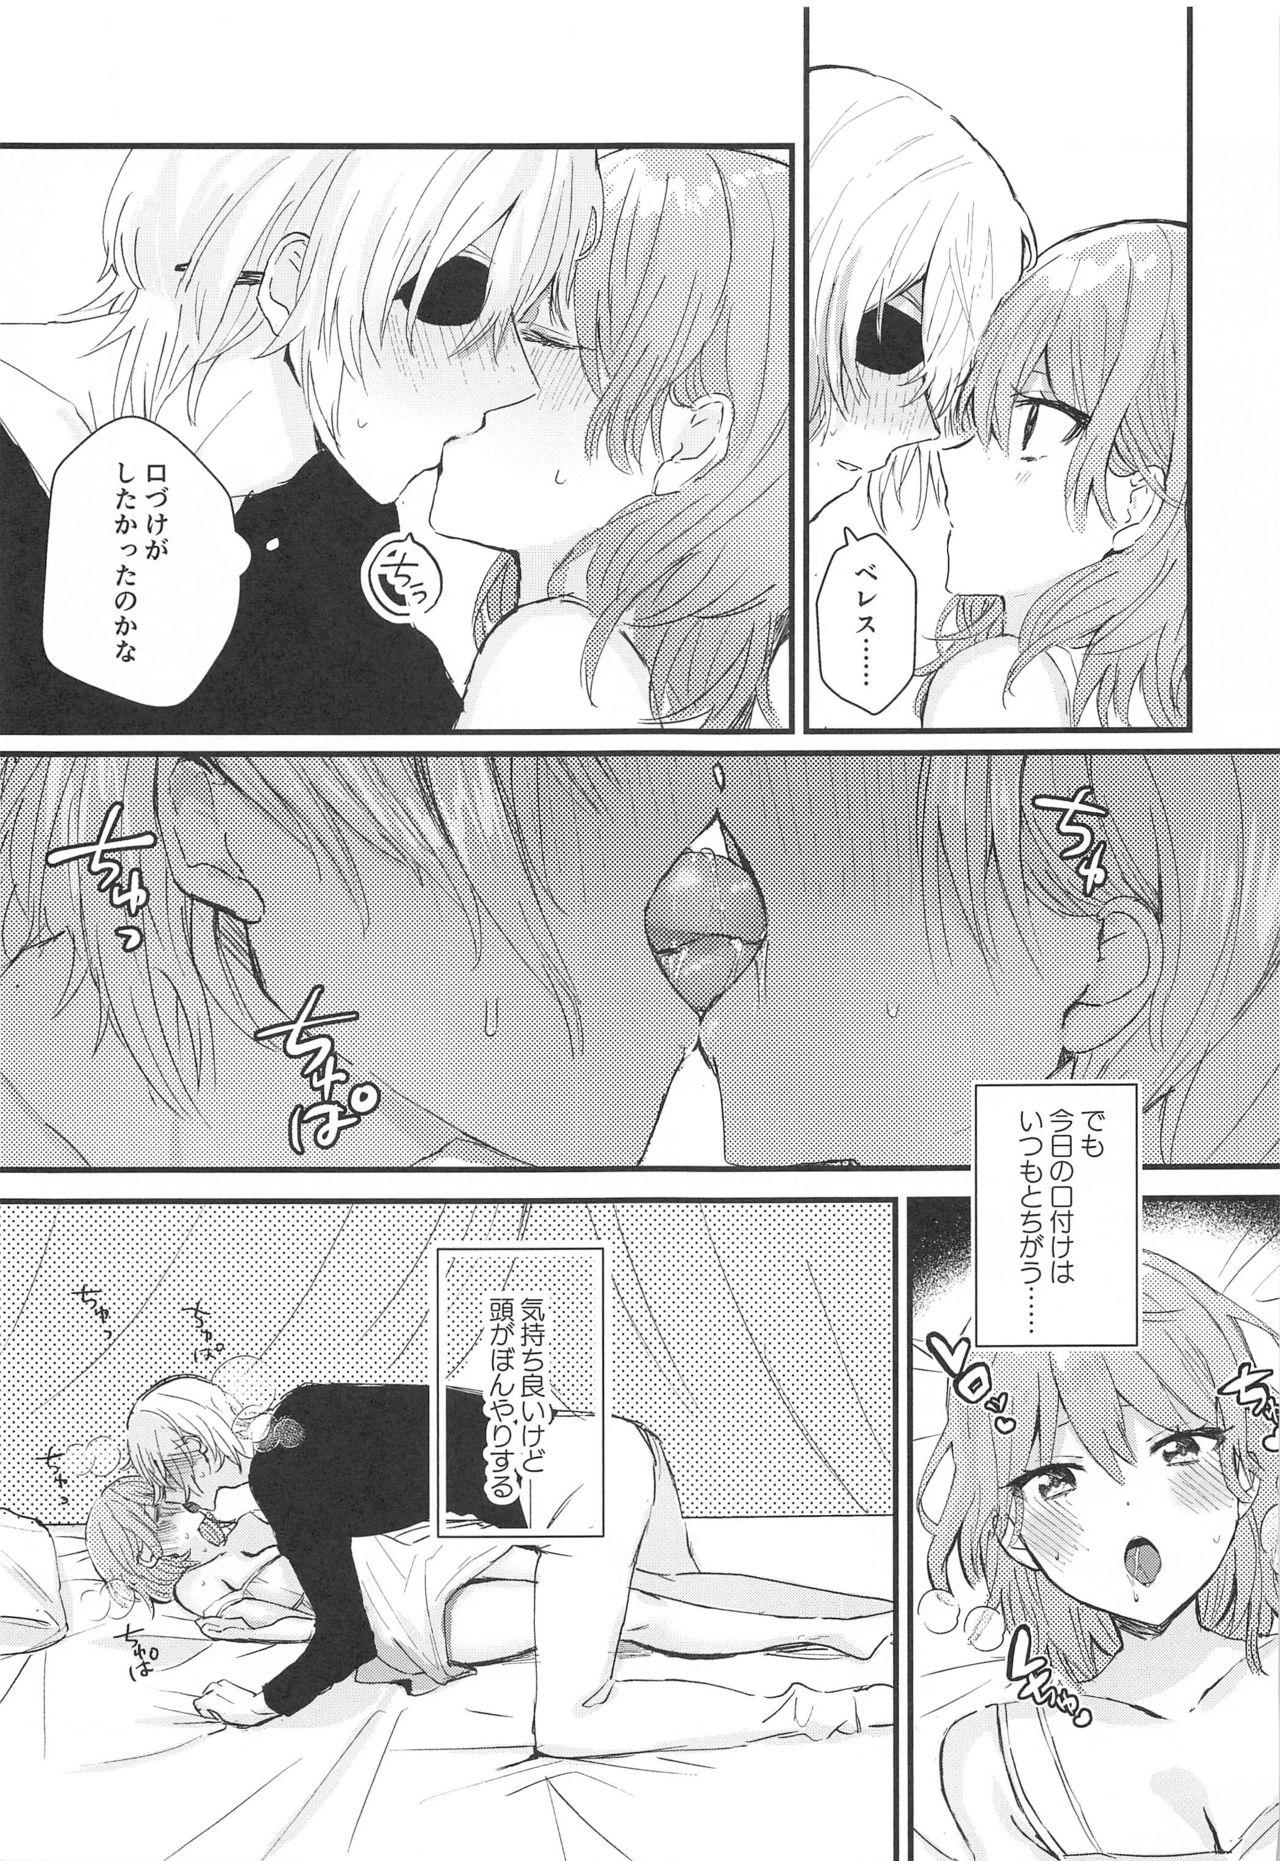 Bangla Sensei no Hatena - What the professor doesn't know - Fire emblem three houses Pussy Eating - Page 6